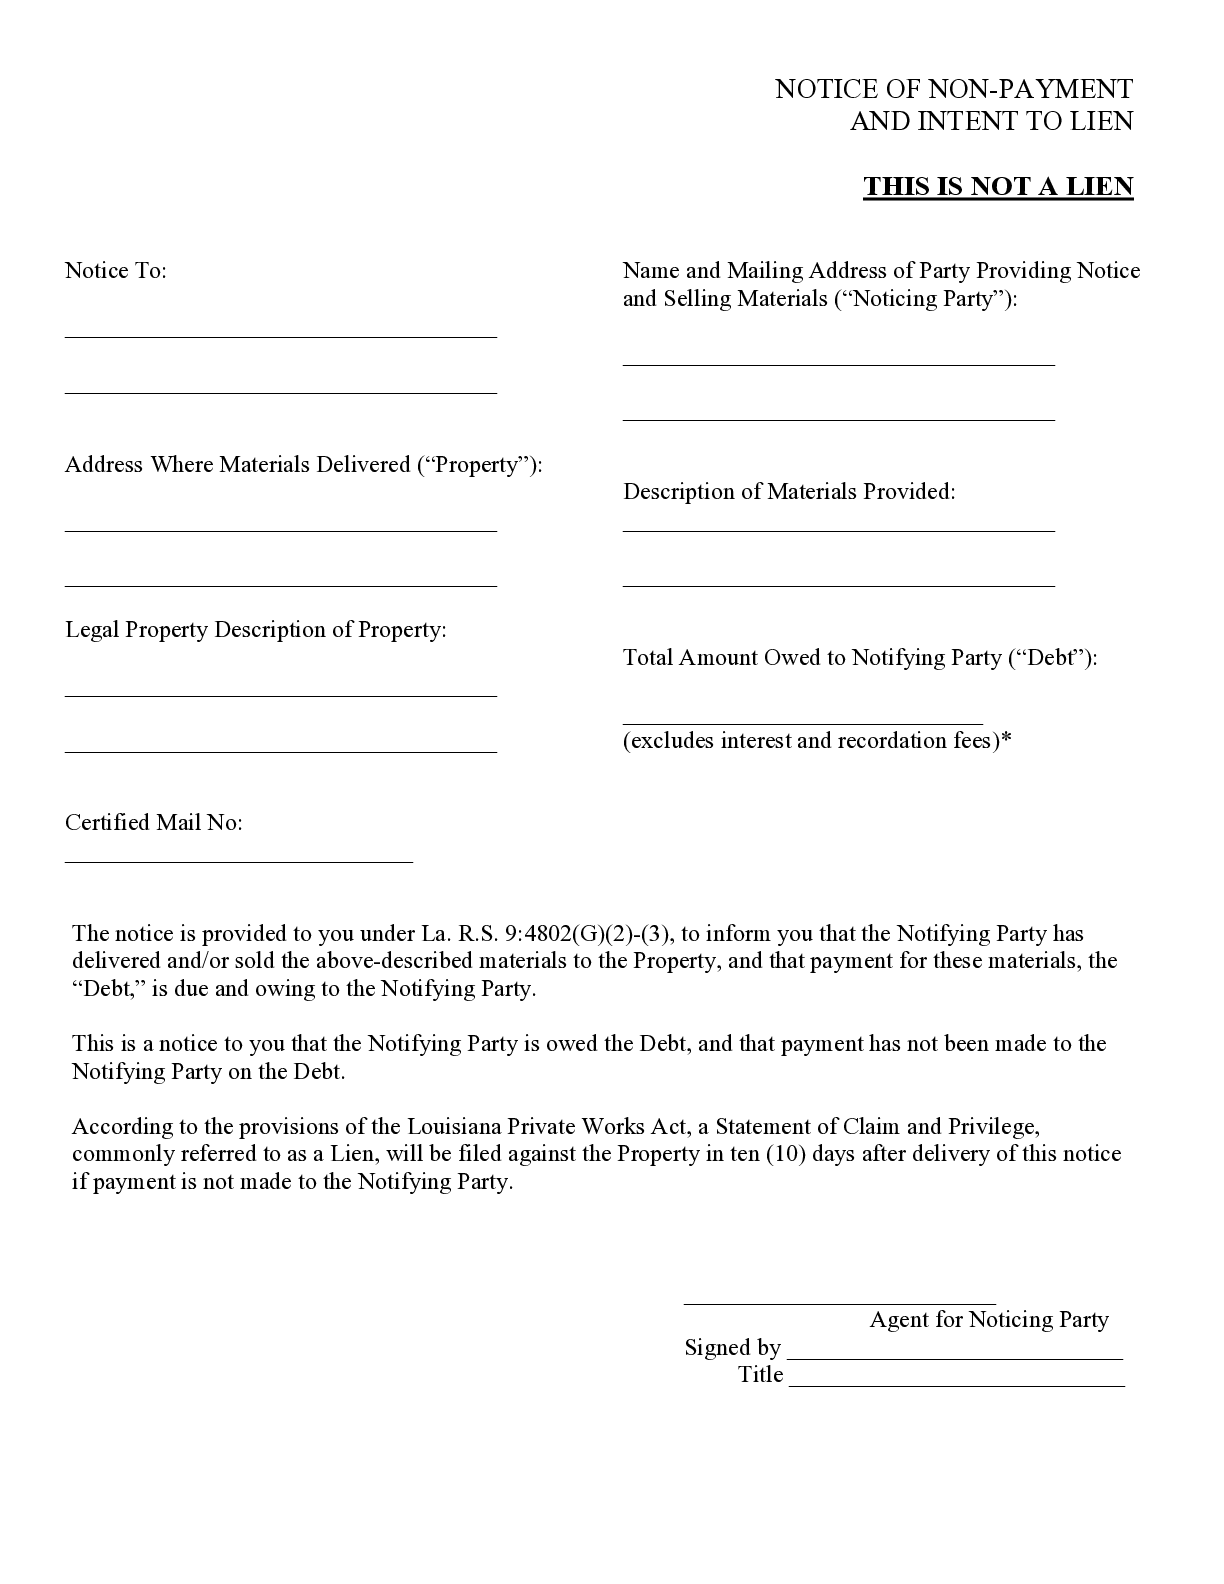 Louisiana Monthly Notice of Non-Payment Form - free from